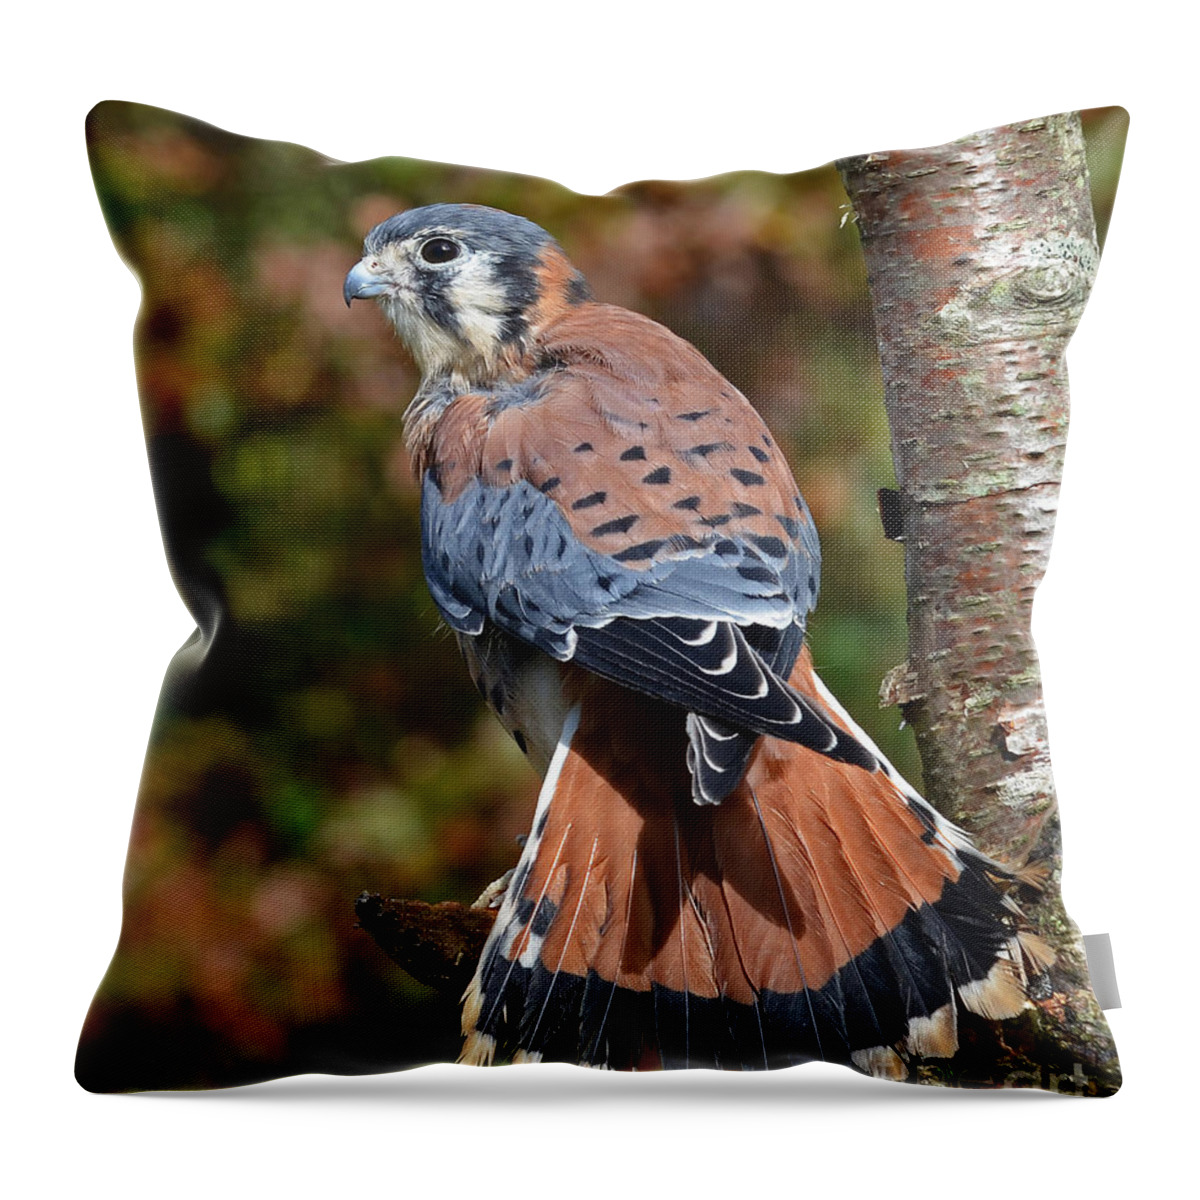 Kestral Throw Pillow featuring the photograph American Kestral Portrait by Rodney Campbell